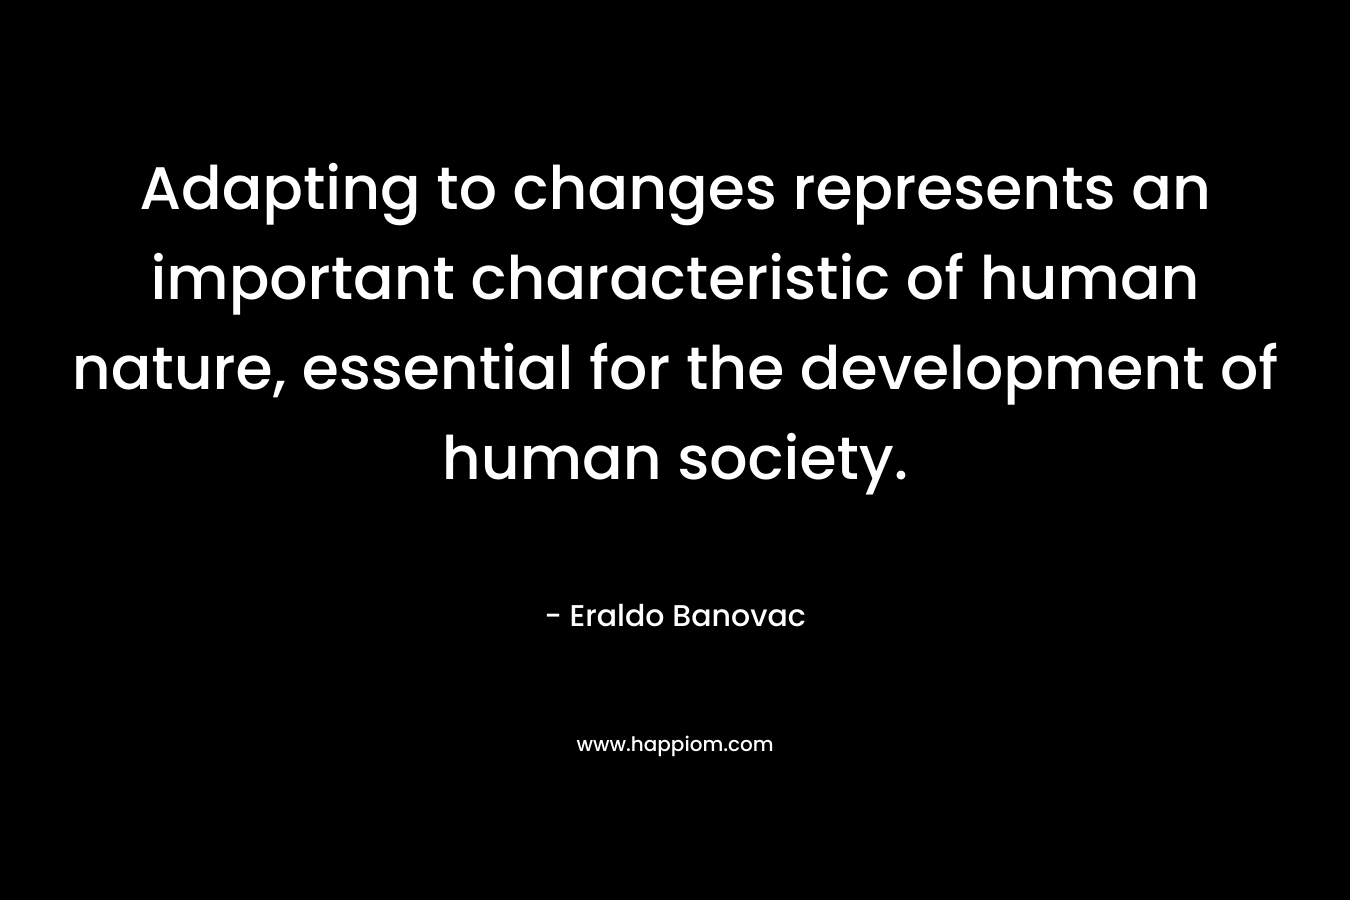 Adapting to changes represents an important characteristic of human nature, essential for the development of human society. – Eraldo Banovac